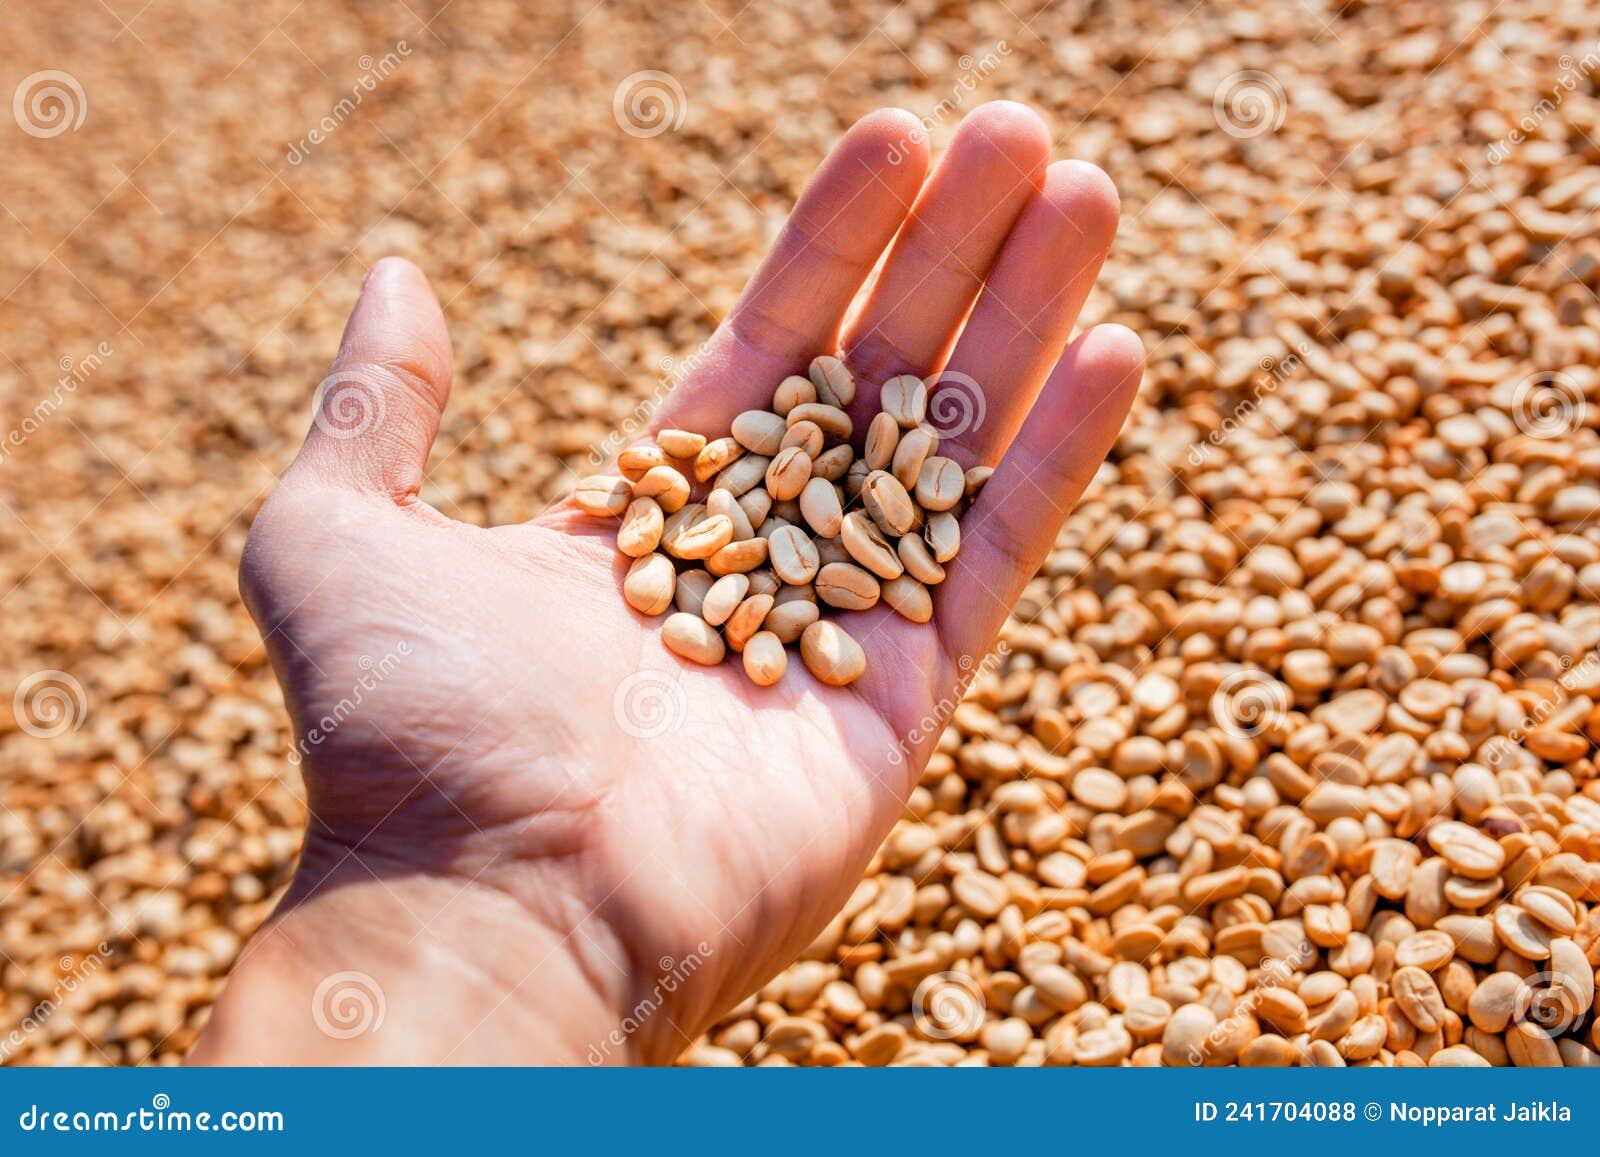 female hands holding raw coffee beans